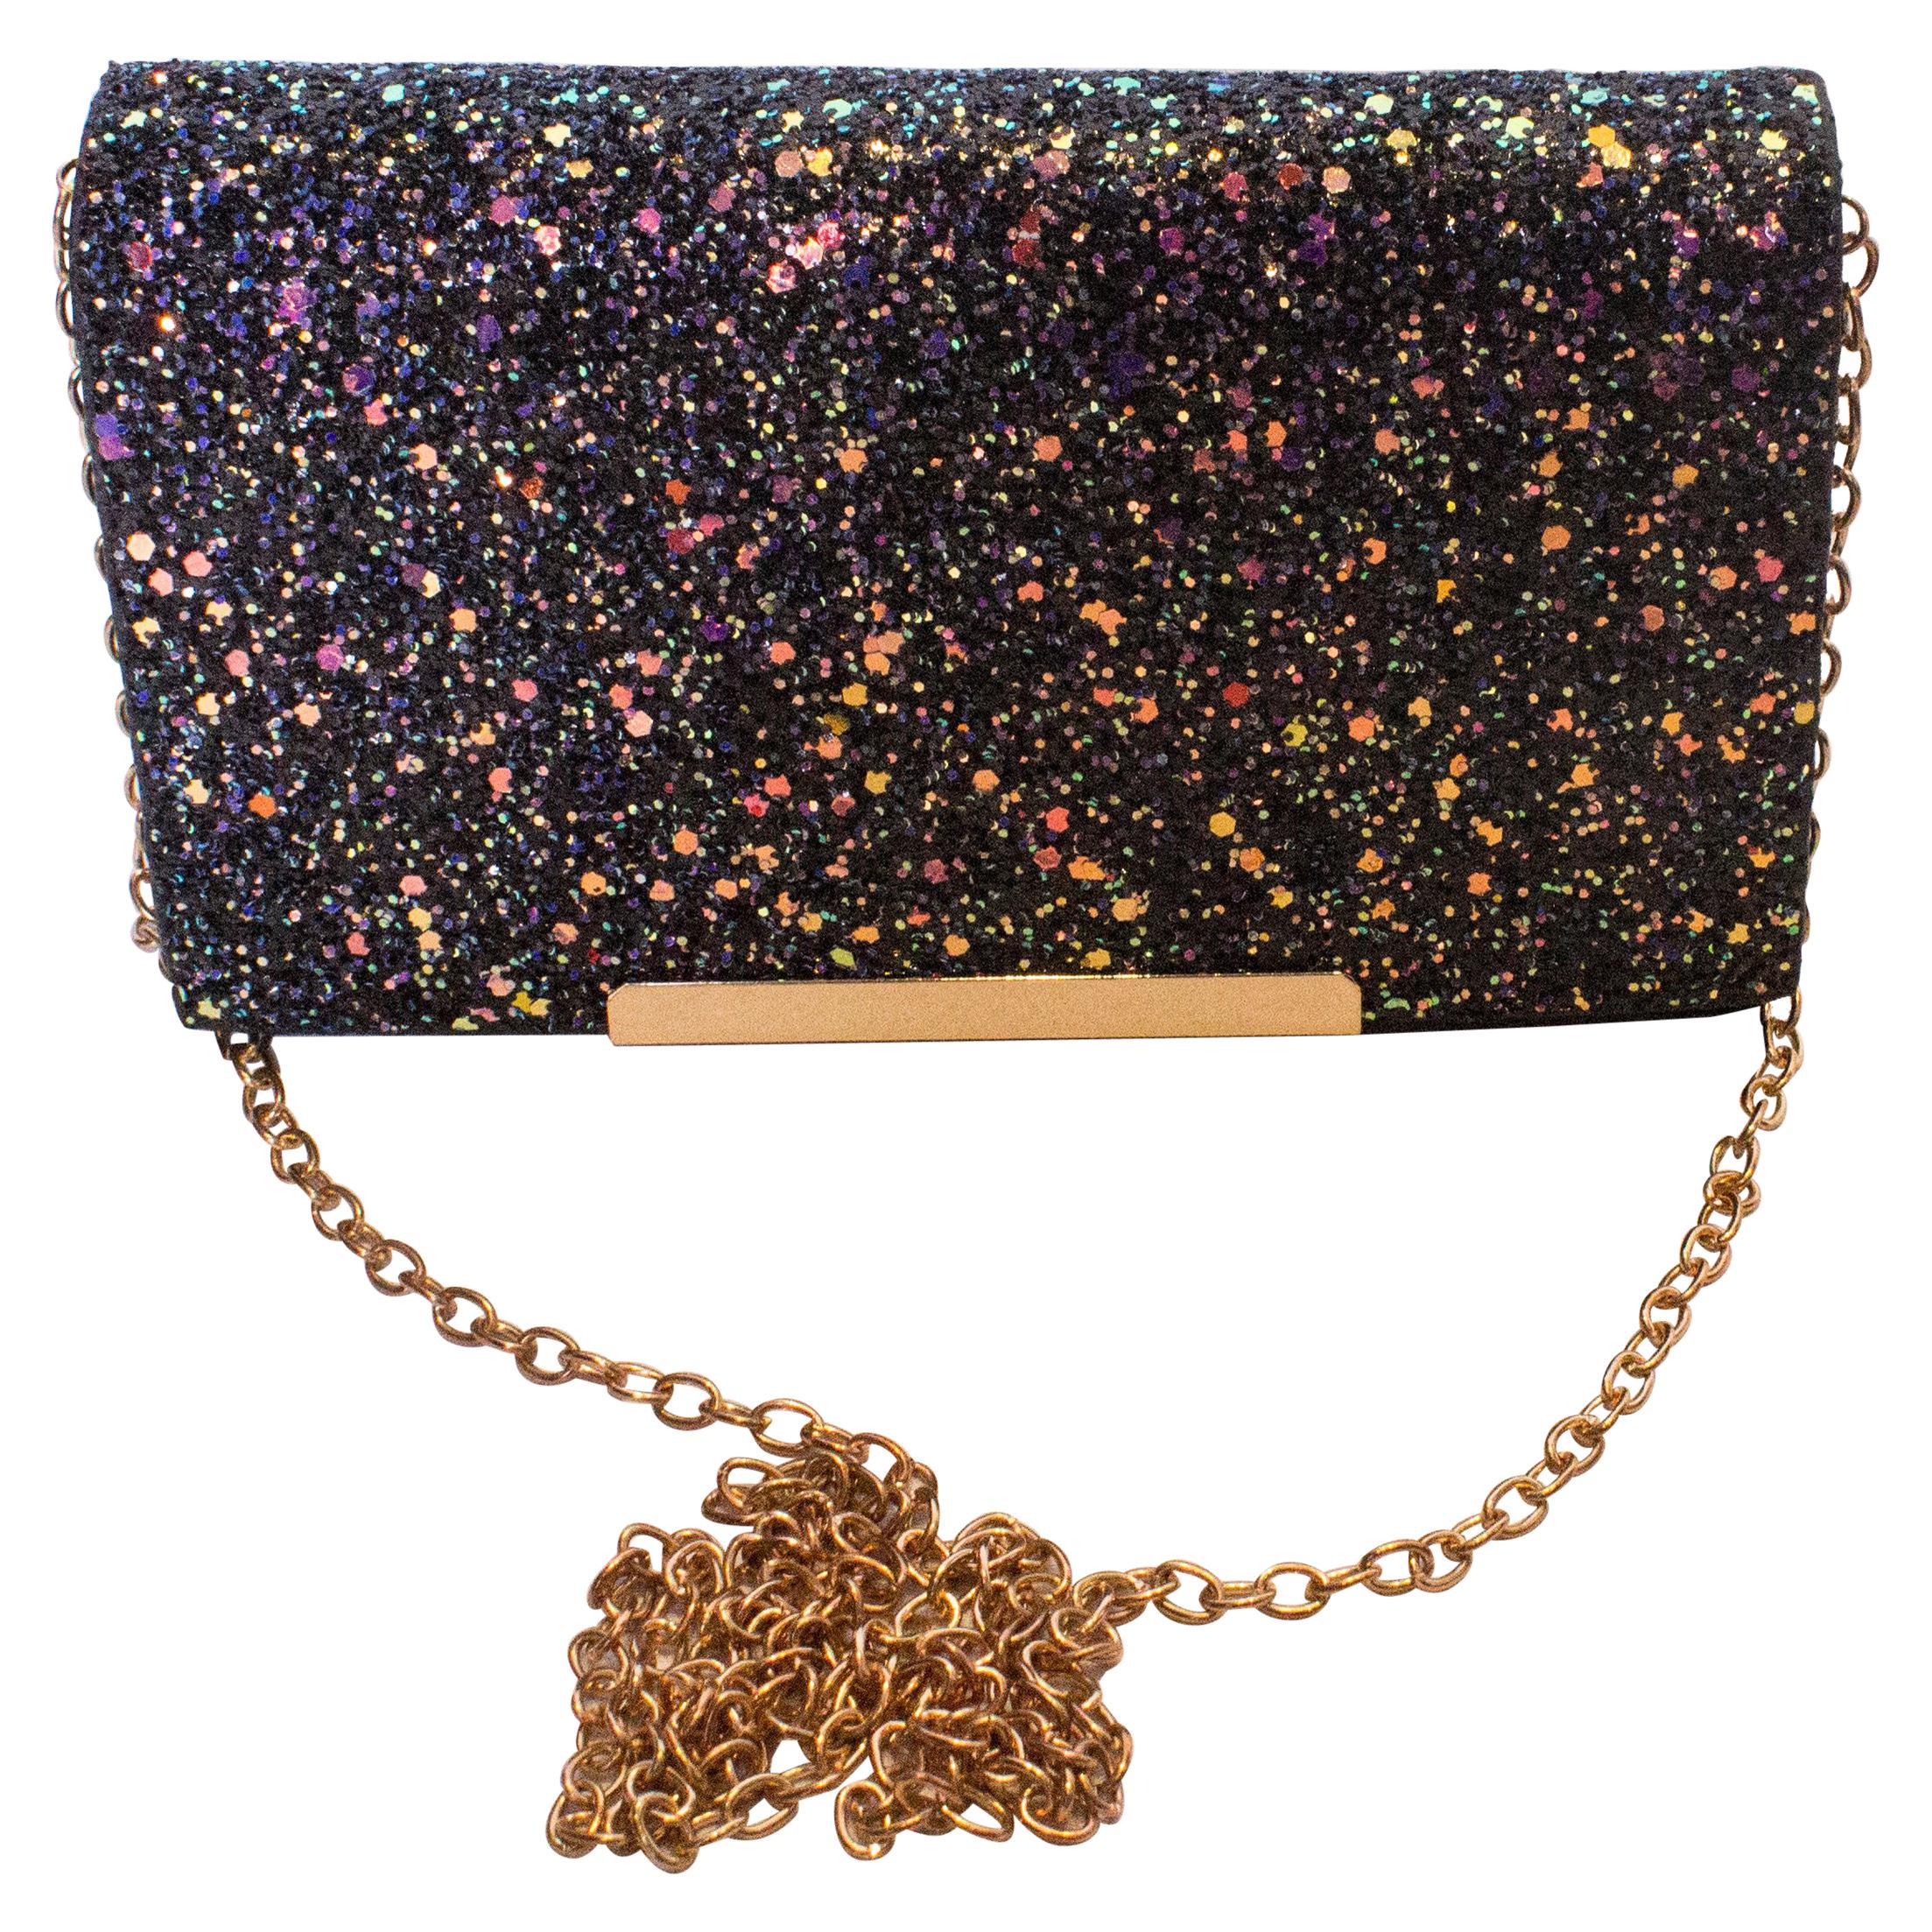 Vintage Party Sparkly Bag For Sale